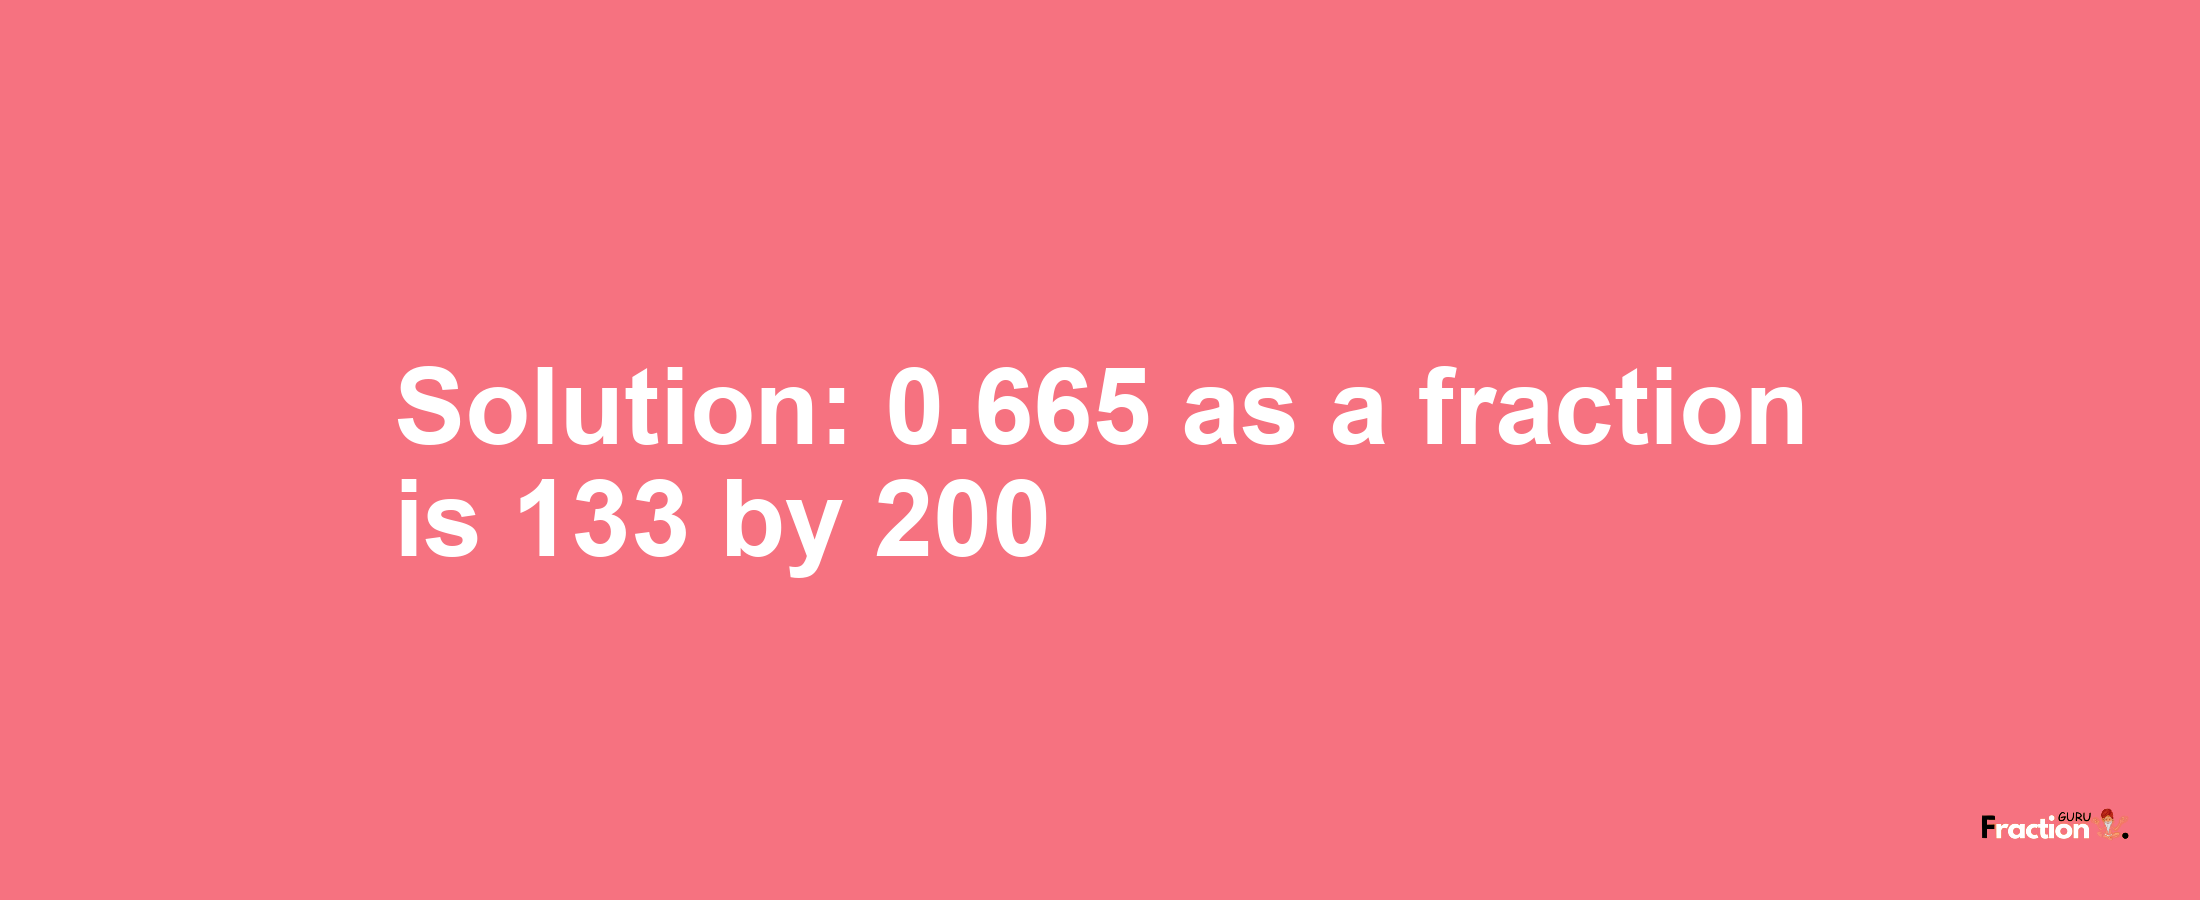 Solution:0.665 as a fraction is 133/200